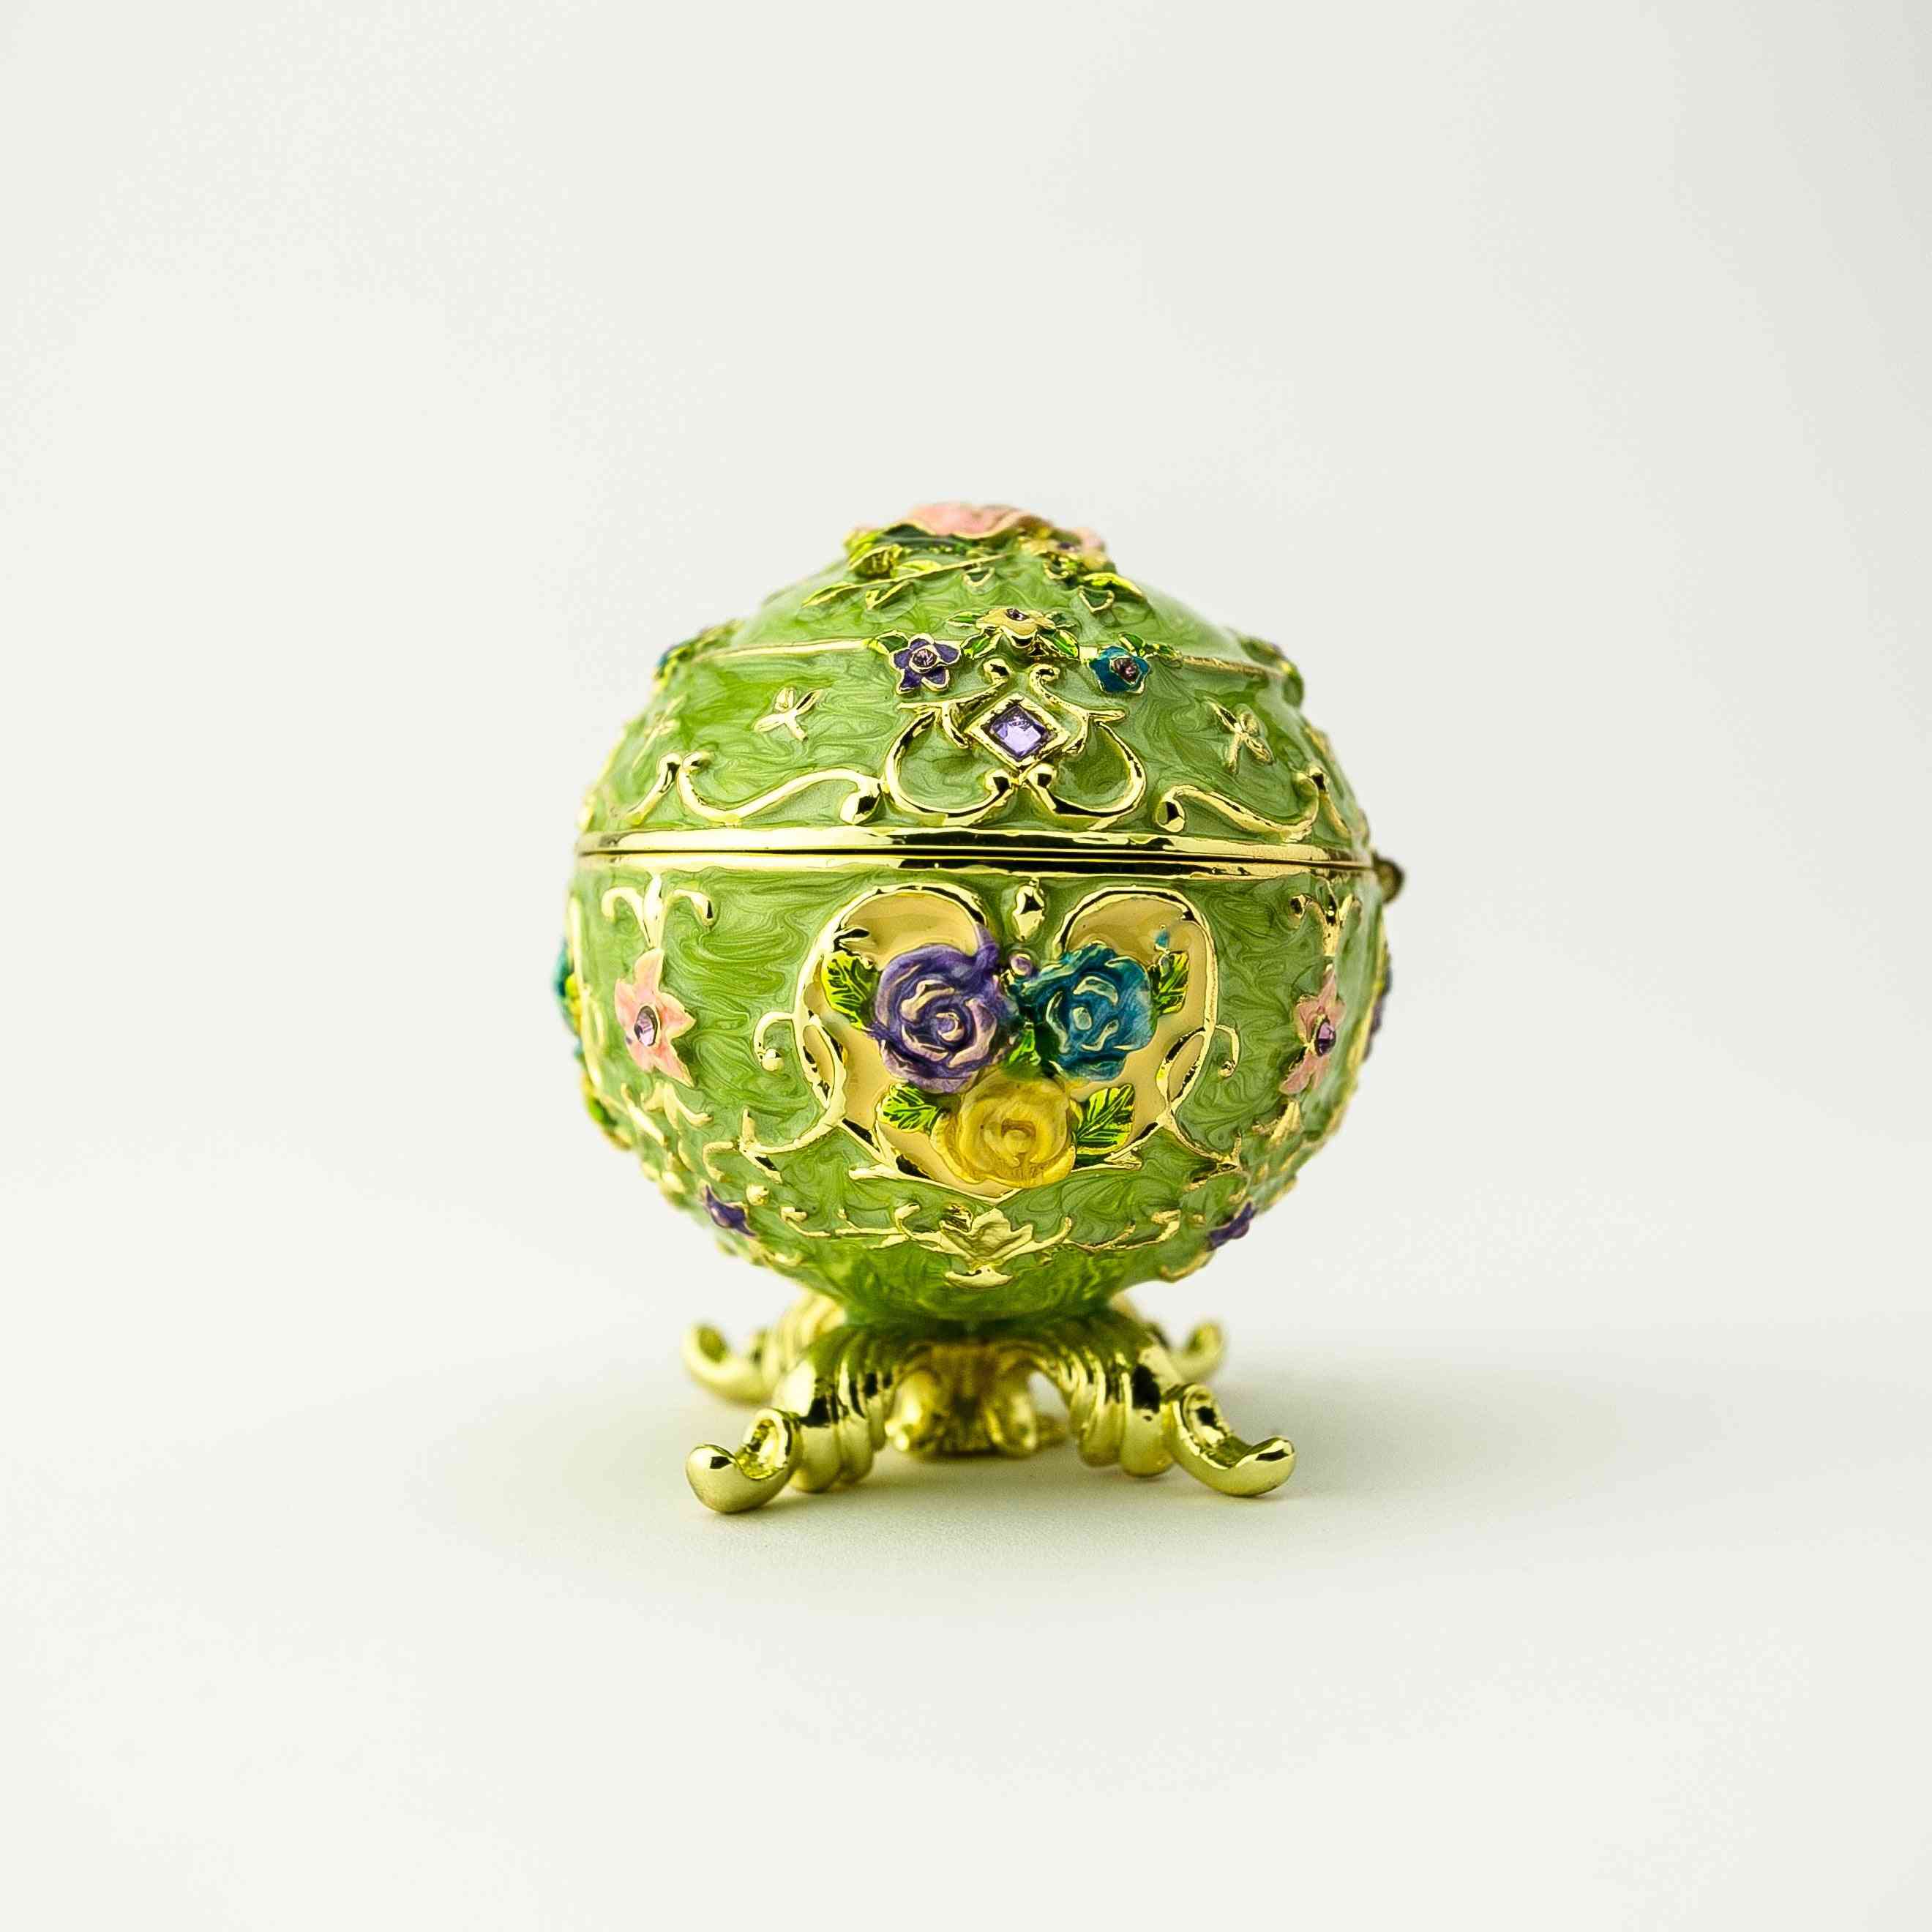 Faberge Egg With Flowers- Trinket Box